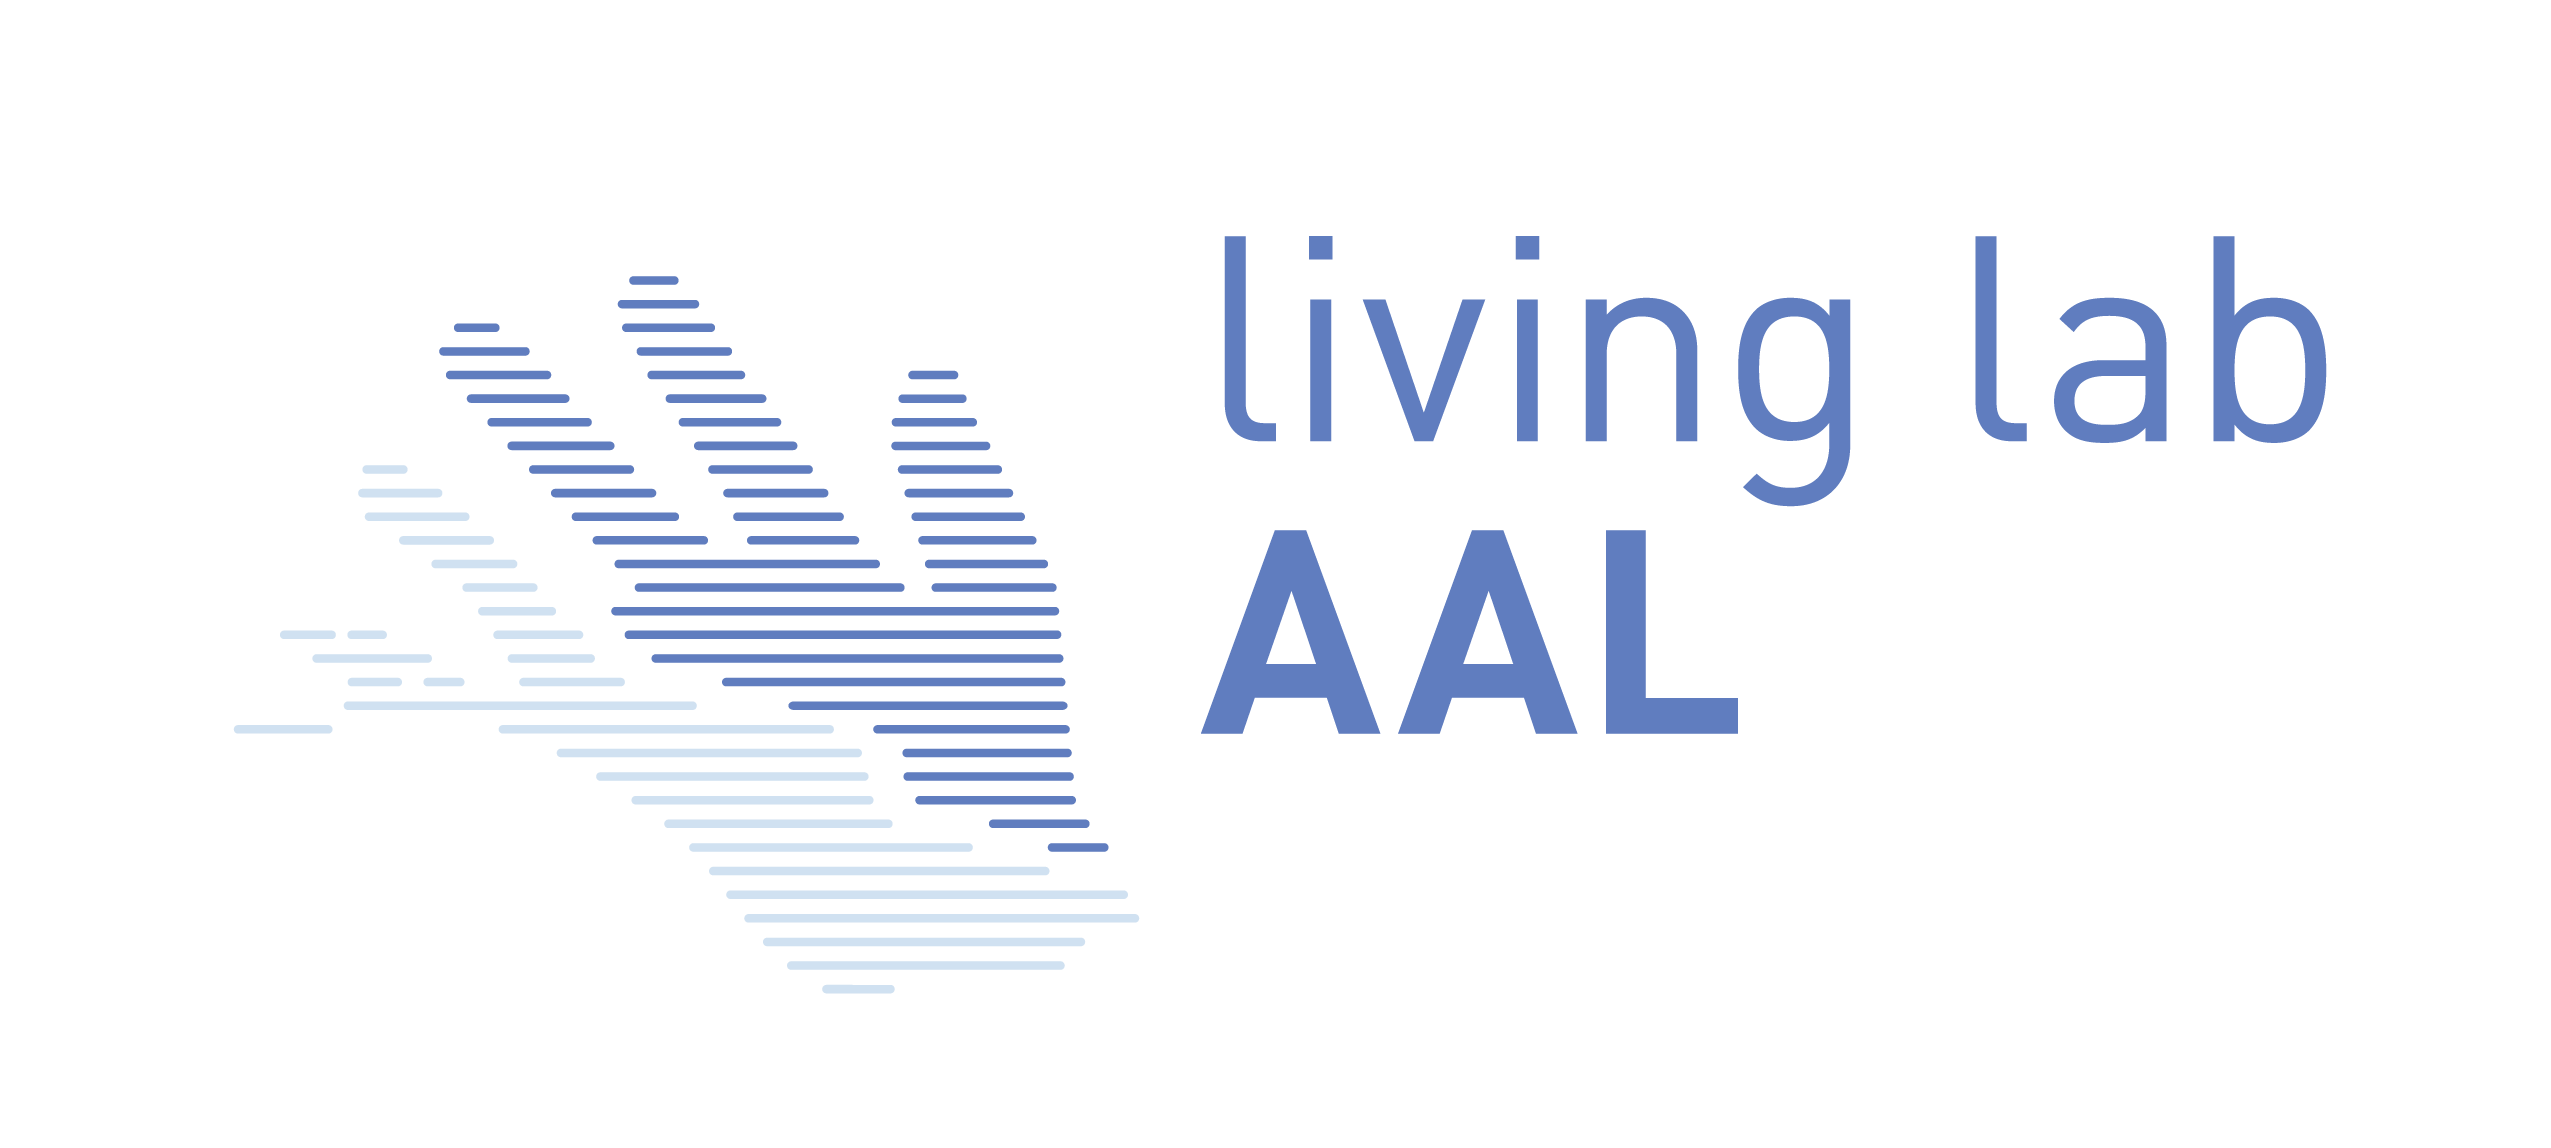 living lab AAL